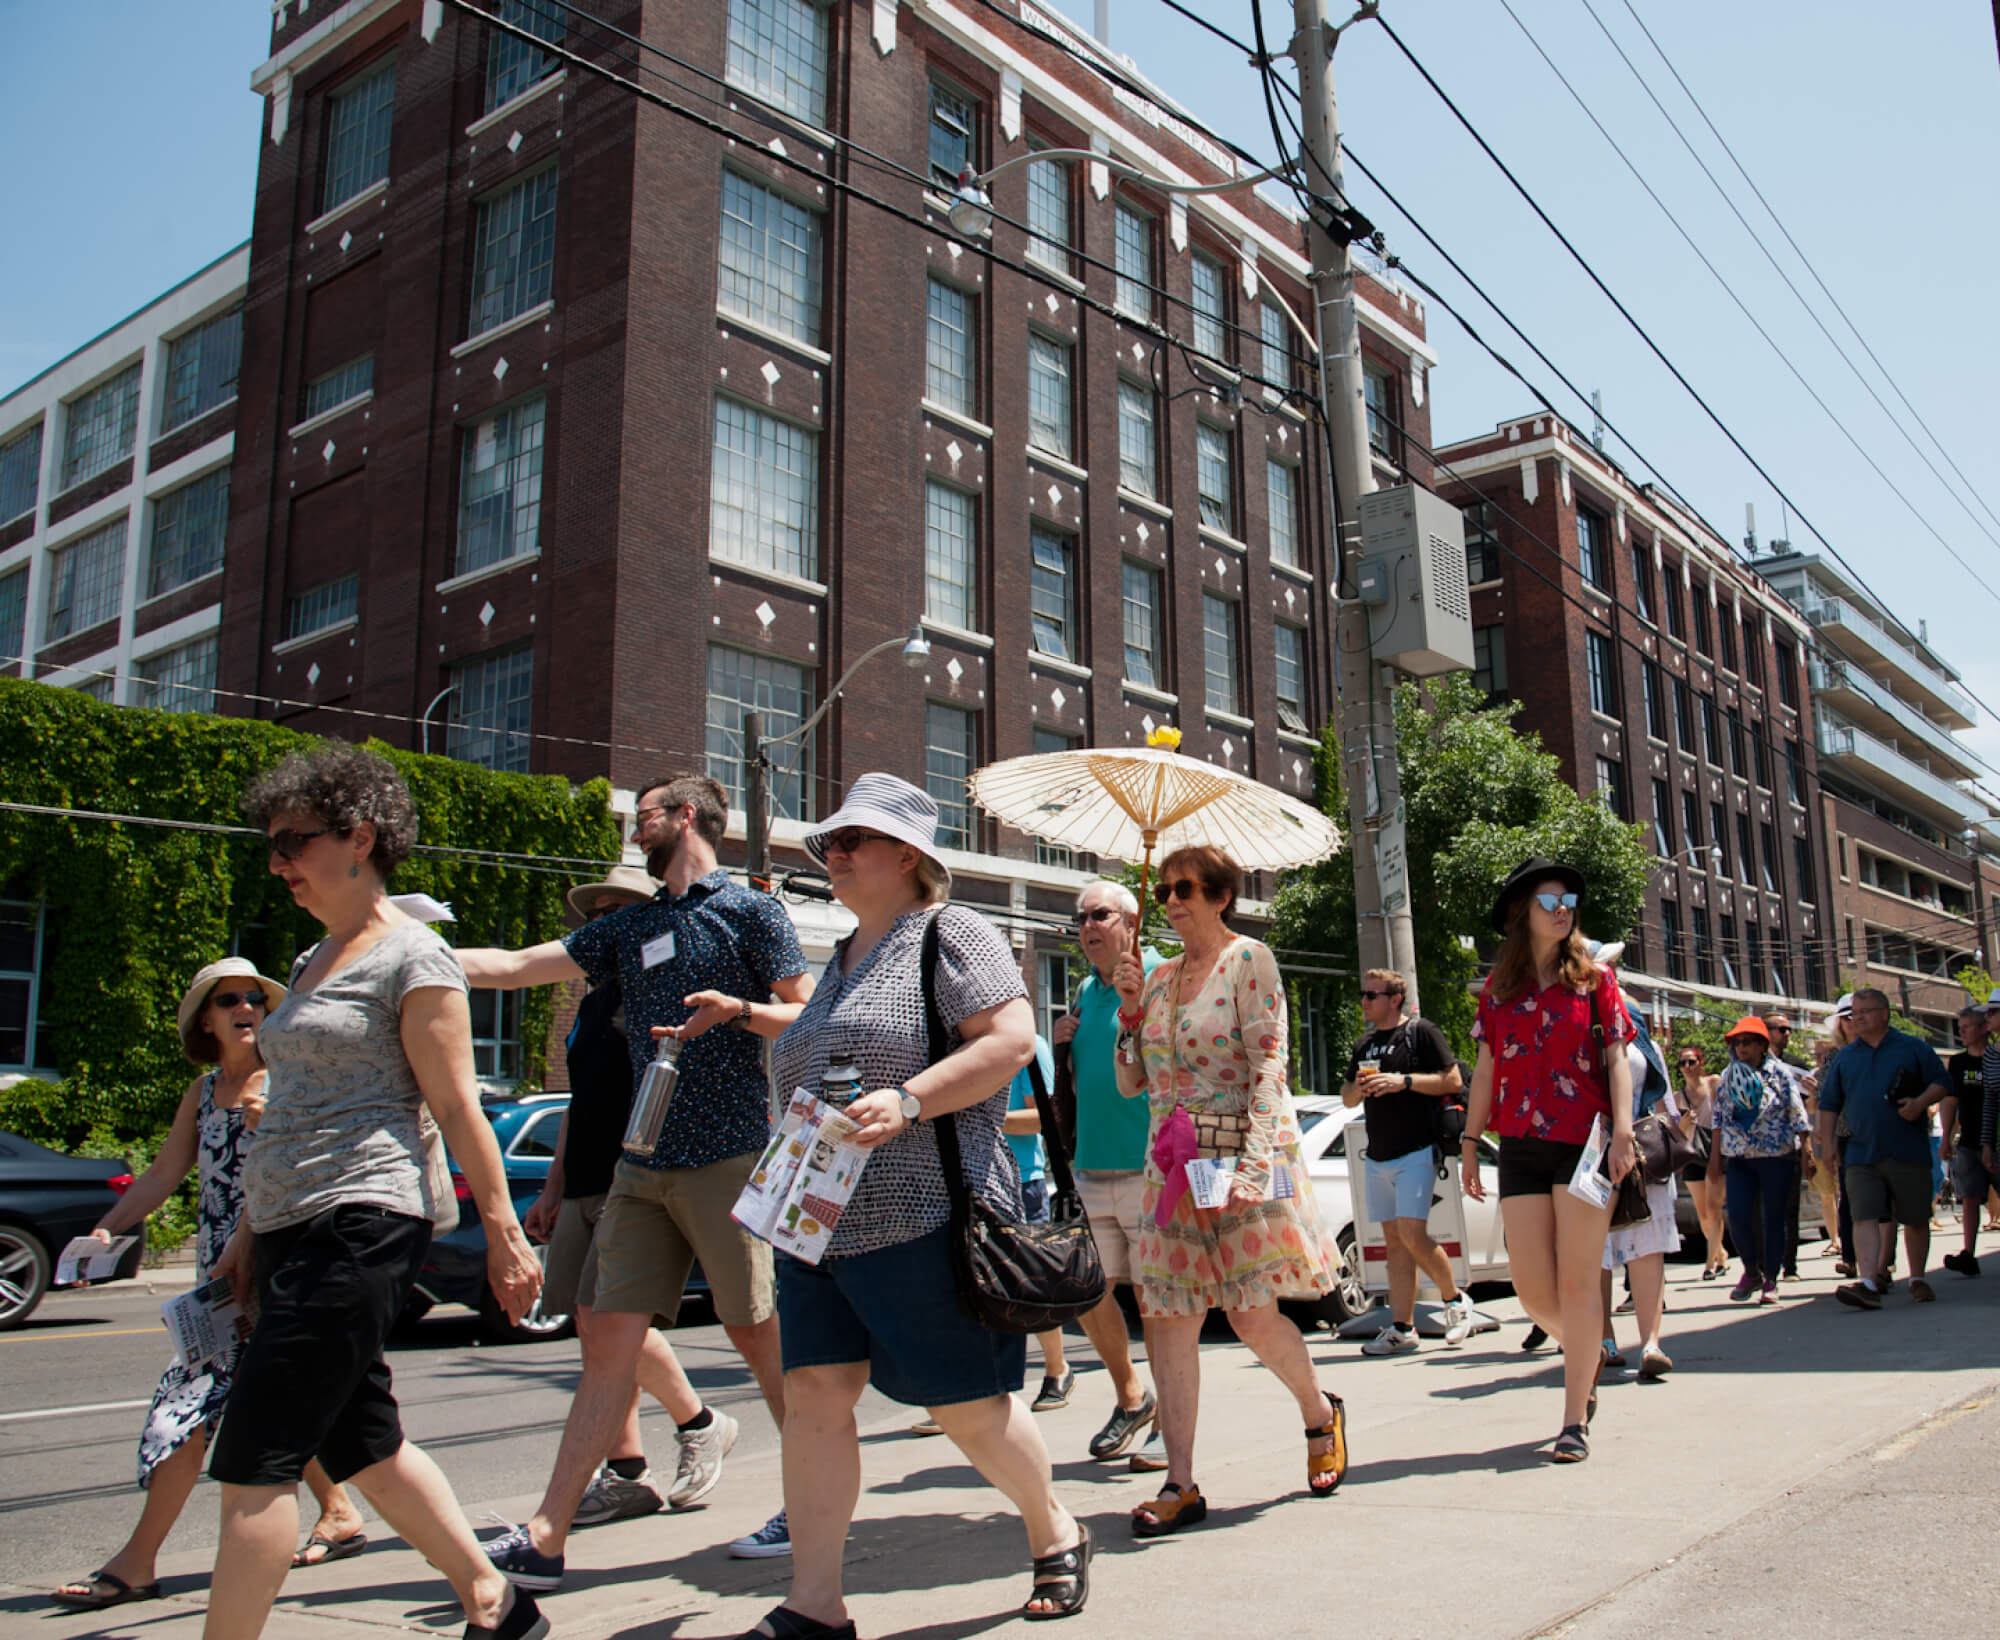 Image of people in summer clothing, including one woman holding an open Chinese umbrella, walk along a sidewalk in front of a five-storey brown brick building which fills the whole background of the photo.